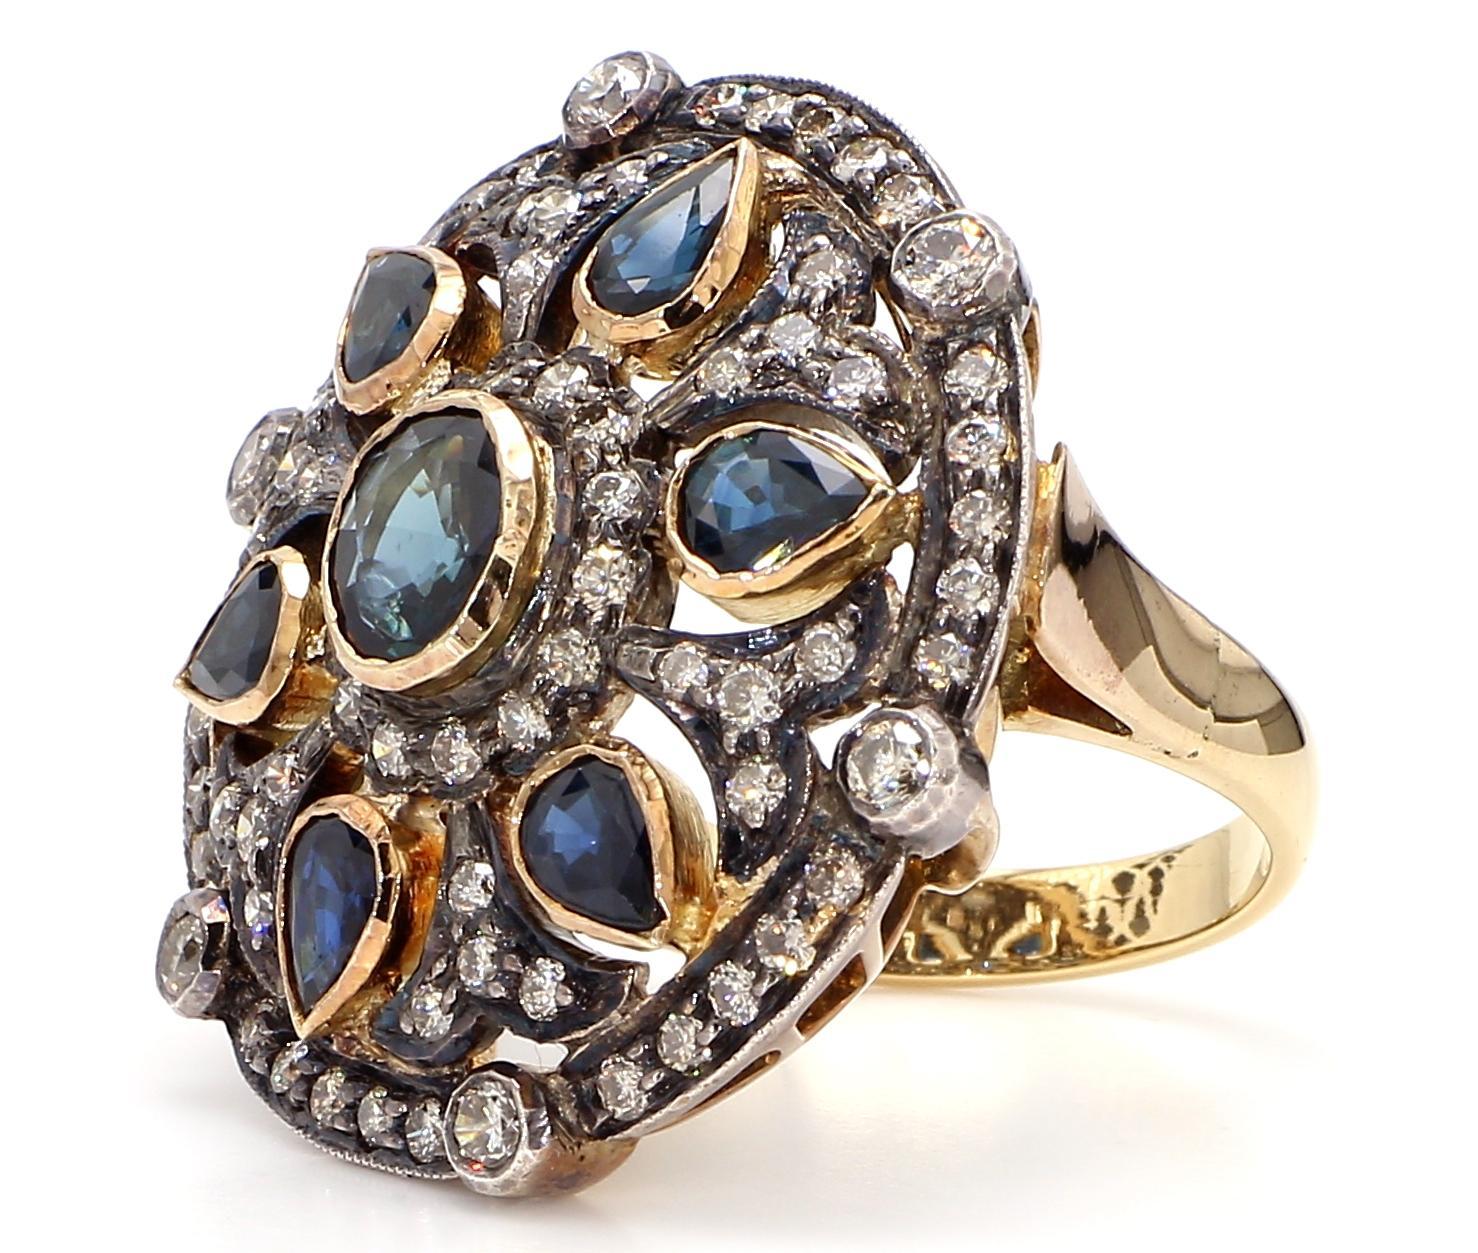 The Antique Round Blue Sapphire Ring is a stunning piece of jewelry that exudes timeless elegance and sophistication. Crafted with a round blue sapphire stone that sparkles with a deep, rich hue, this ring is a truly unique and eye-catching